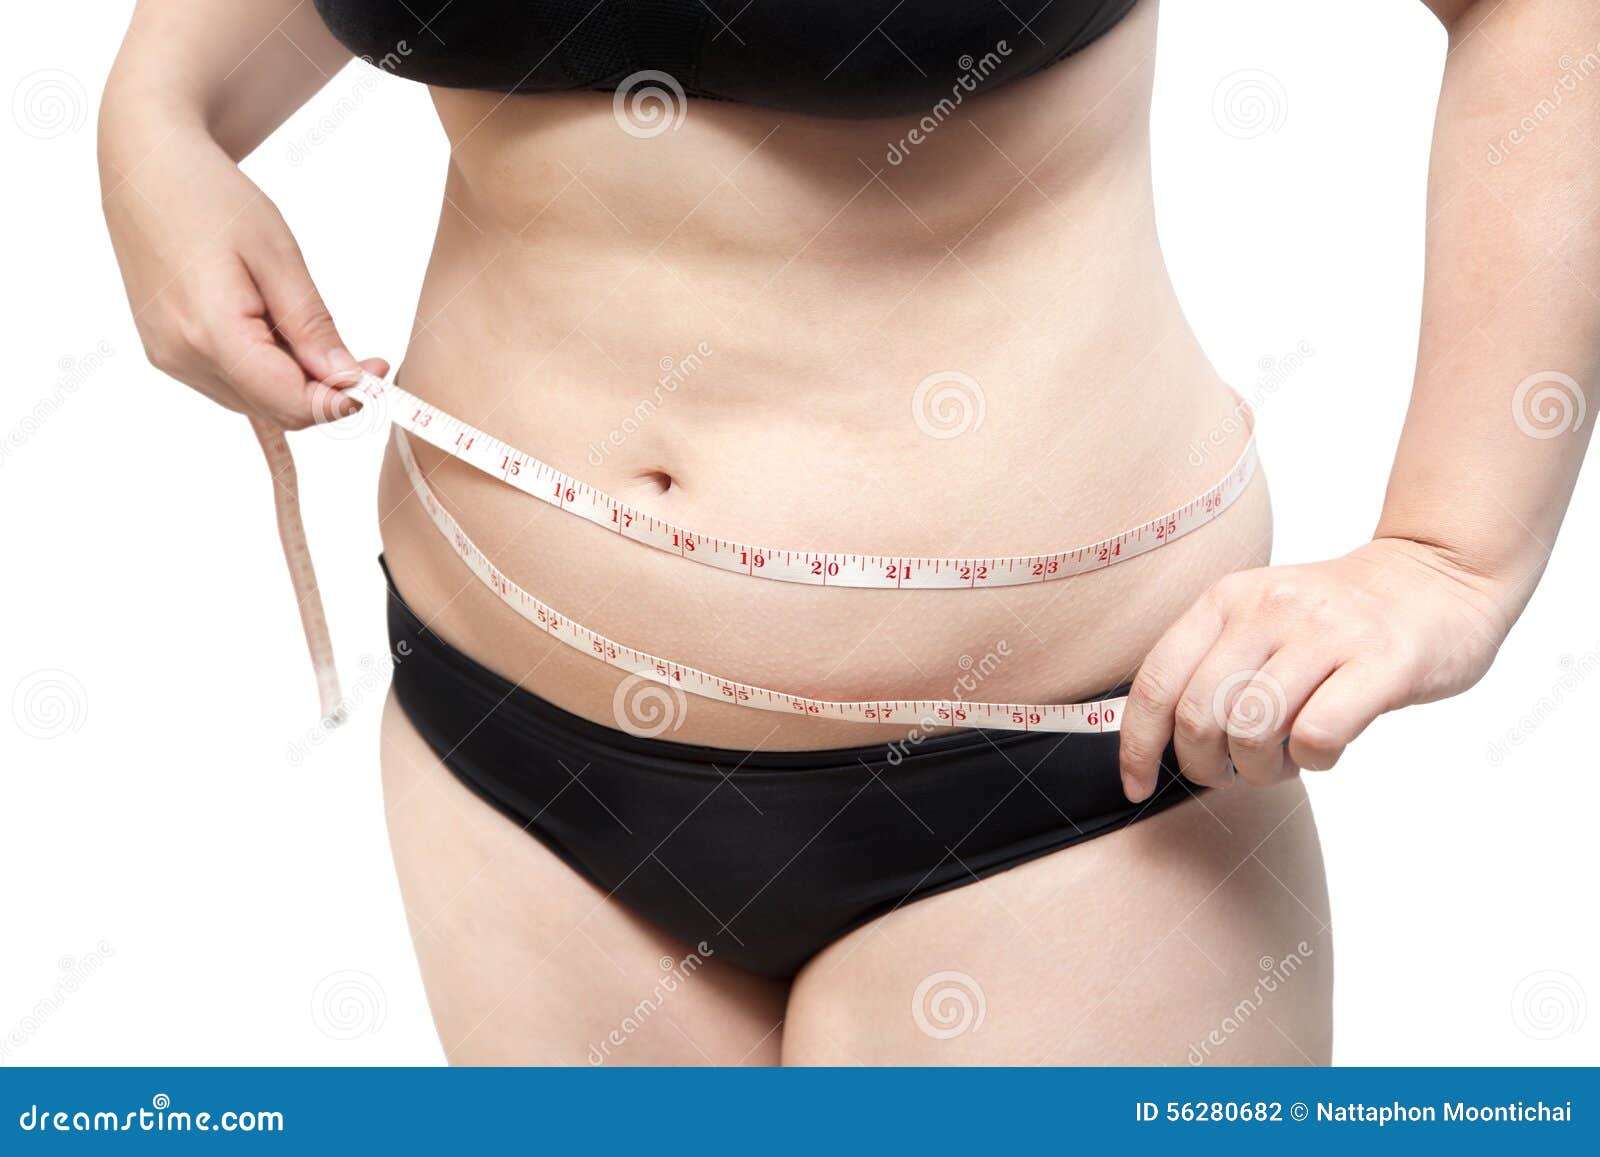 Woman Squeeze Belly Fat Wearing Black Underwear Bra and Pant on White  Isolated Stock Image - Image of healthy, female: 56280855